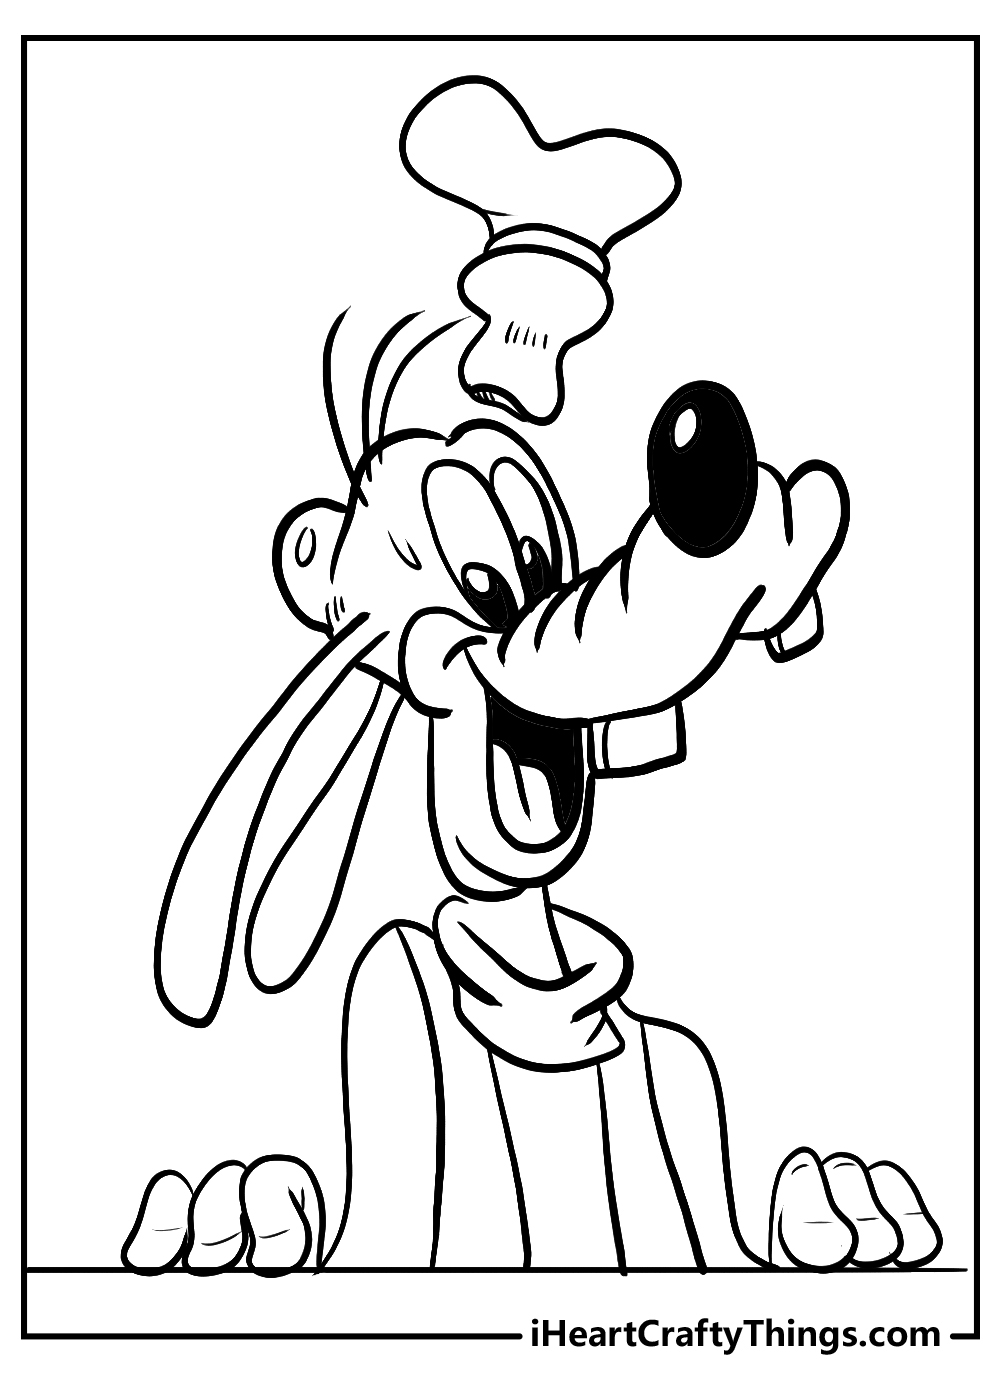 goofy drawing for coloring